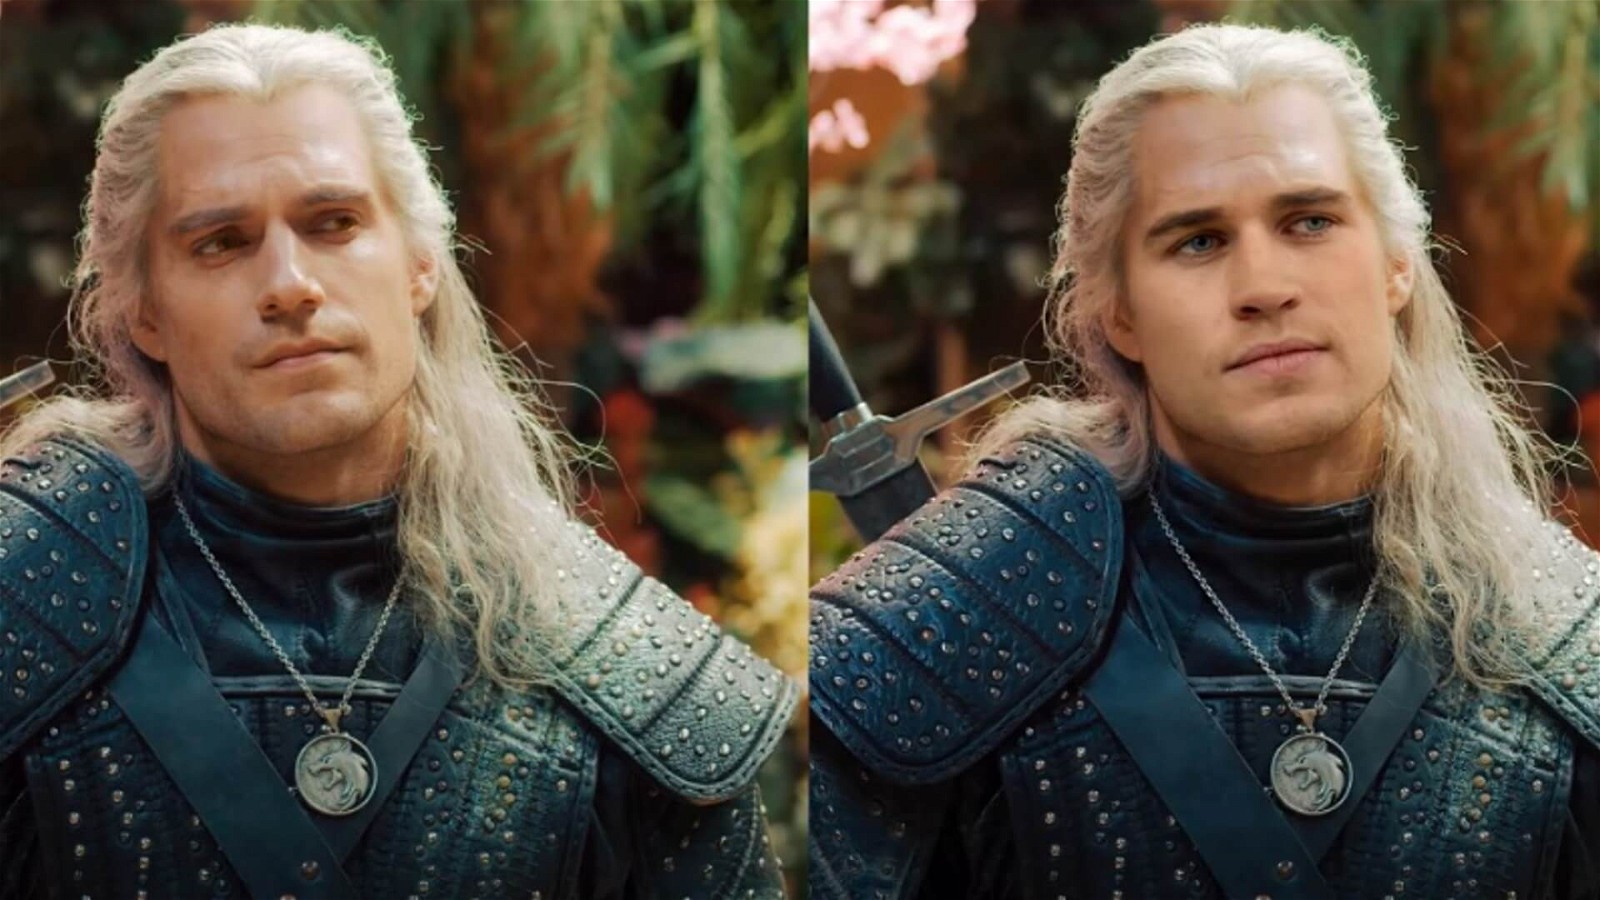 The Witcher deepfake as Liam Hemsworth takes away the mantle from Henry Cavill